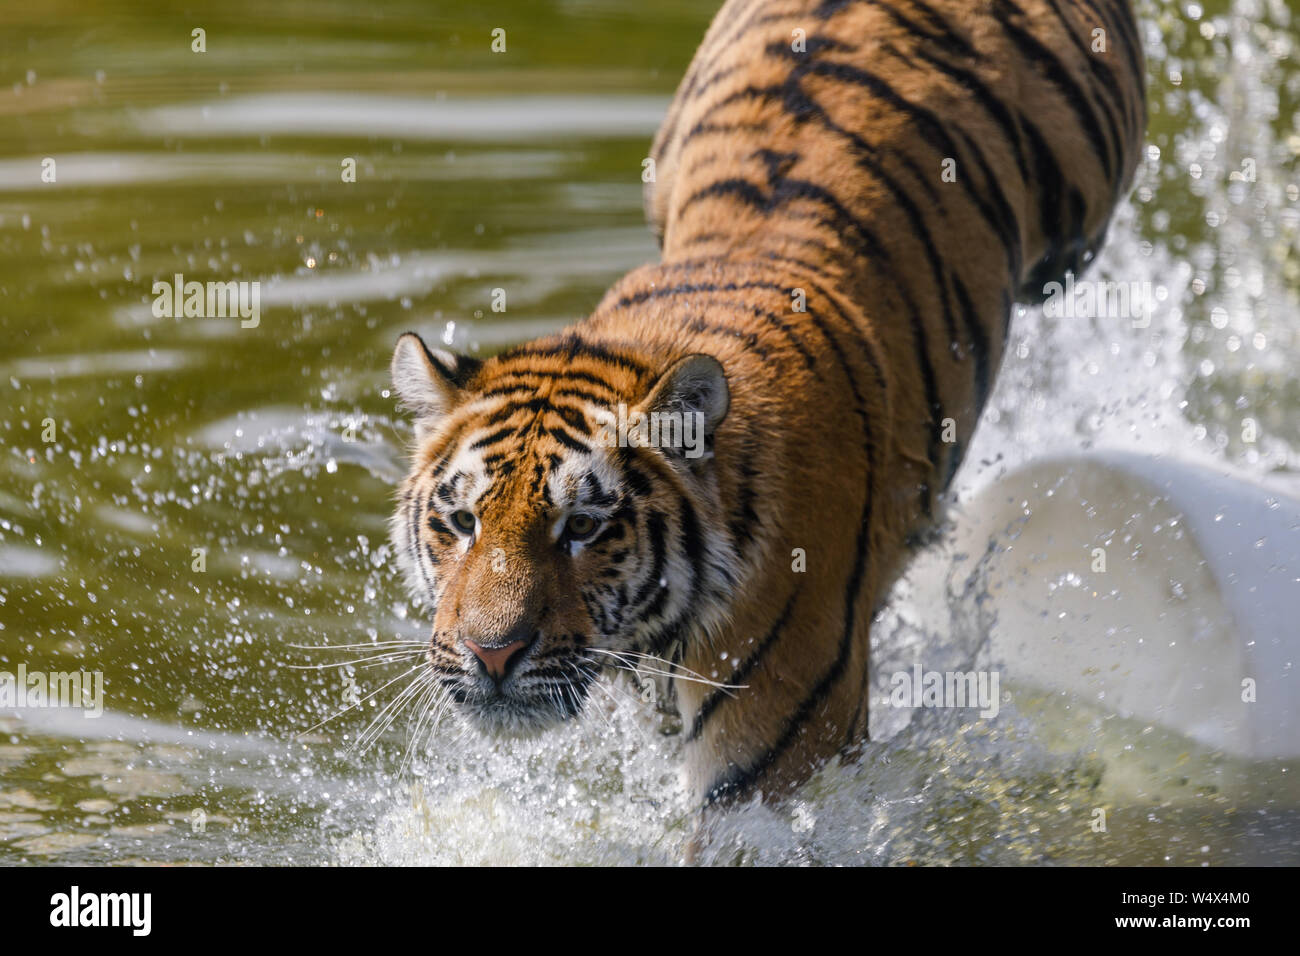 ZSL Whipsnade Zoo, Bedfordshire. 25th July 2019. UK Weather: Animals splash  around in the water to cool down at ZSL Whipsnade  breaking  heatwave, with temperatures of up to 39 degrees have